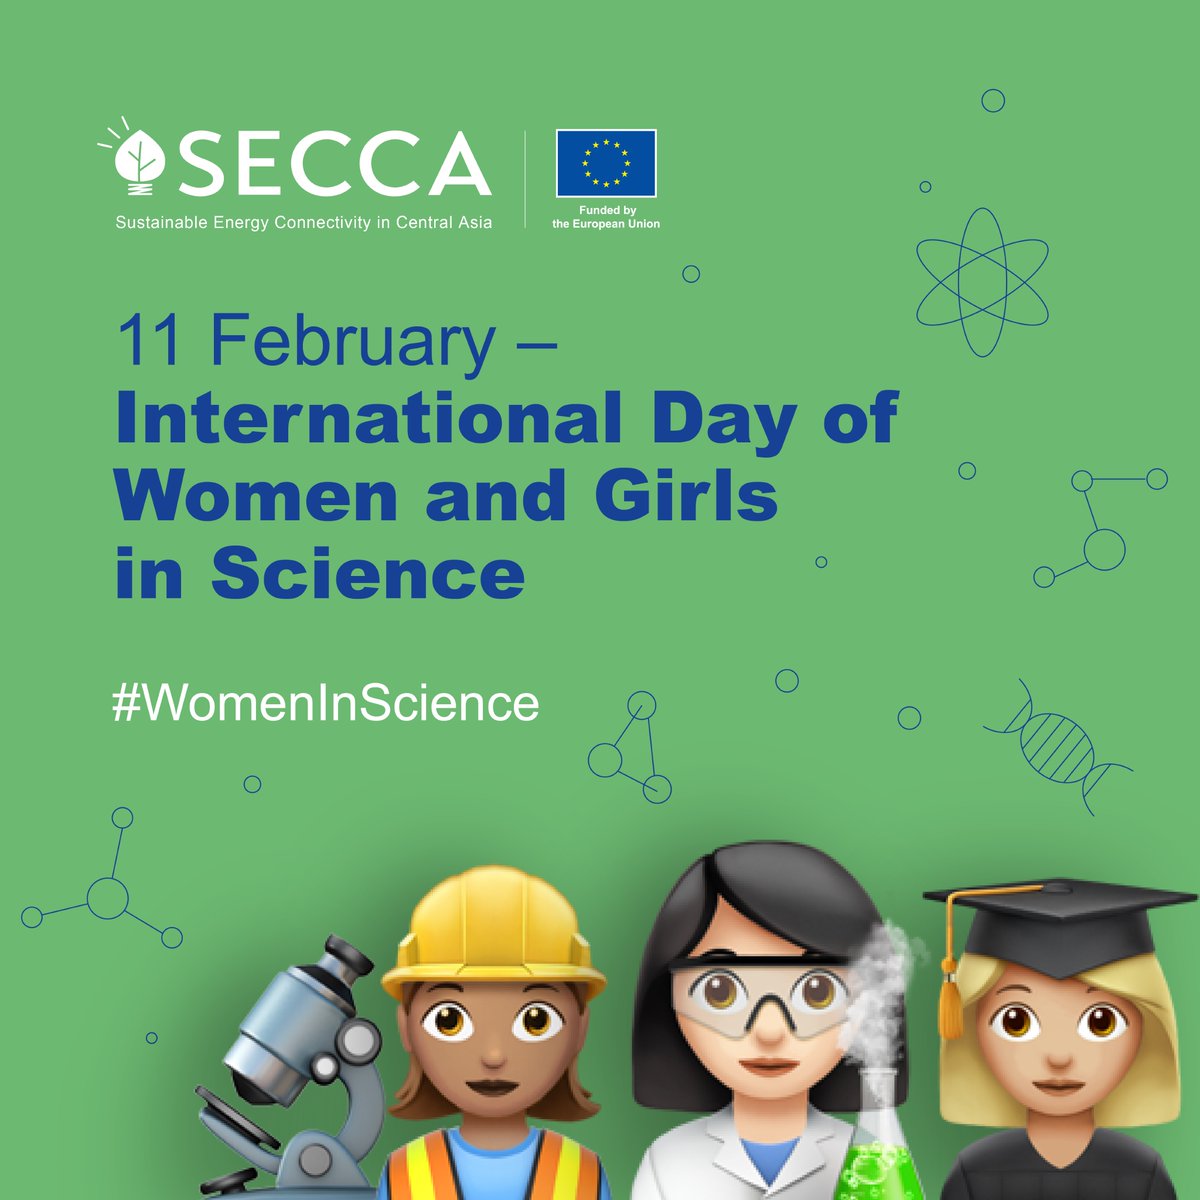 Towards gender equality in STEM in Central Asia and Europe👩‍🔬 — check out the interview with SECCA Gender Specialist Silvia Sartori: shorturl.at/wzQ69. She discusses the meaning of this International Day and why it matters to support and promote #WomenInScience.